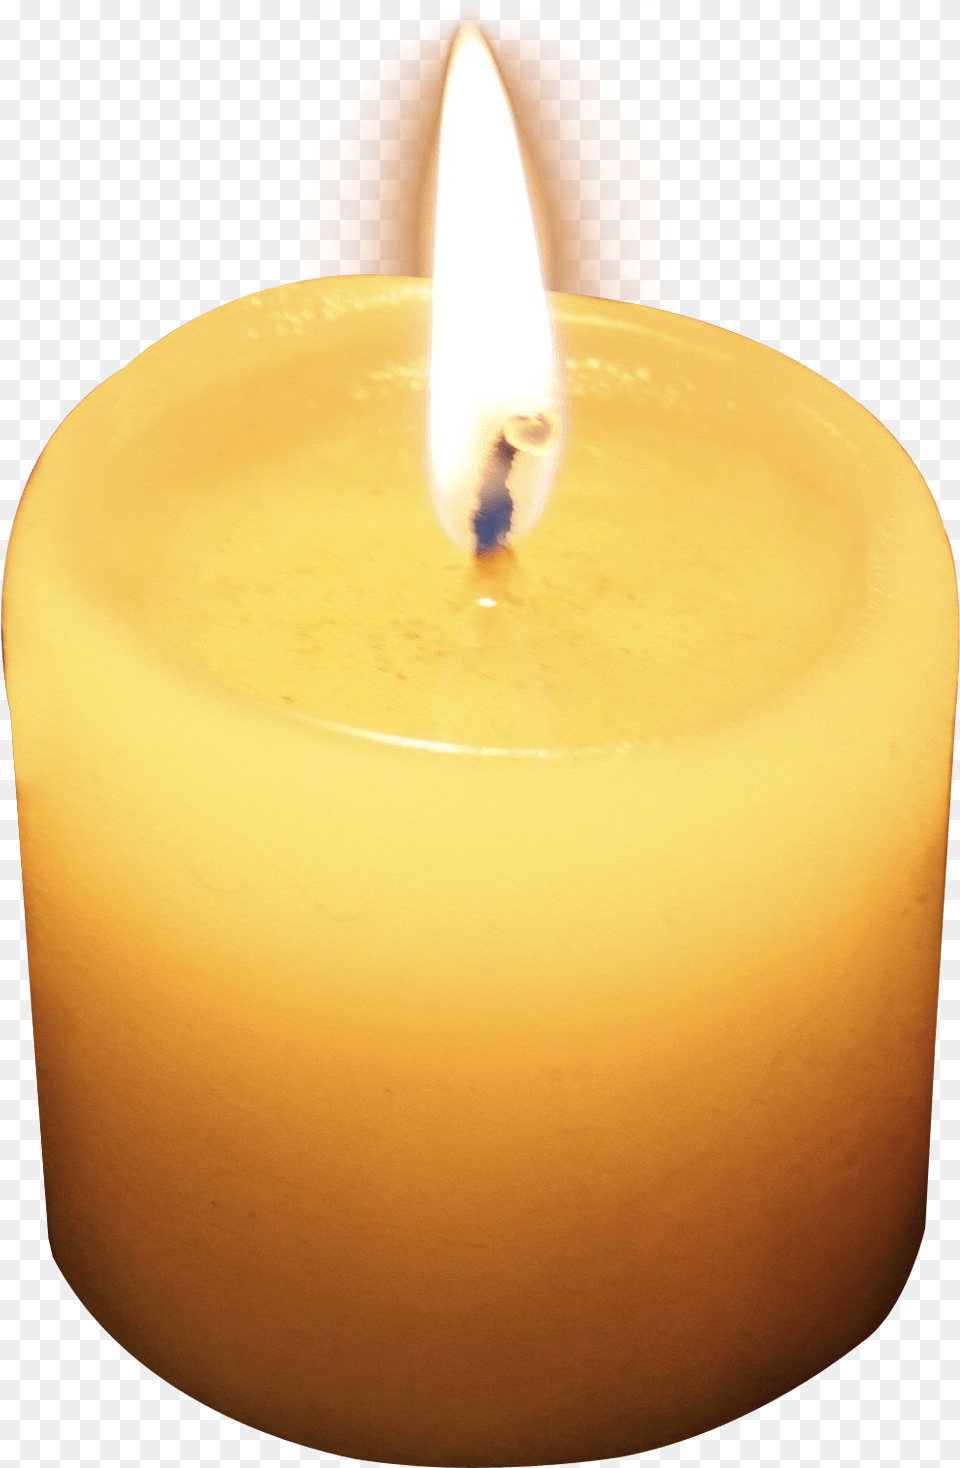 Candle Image Pngpix Candle, Fire, Flame Png